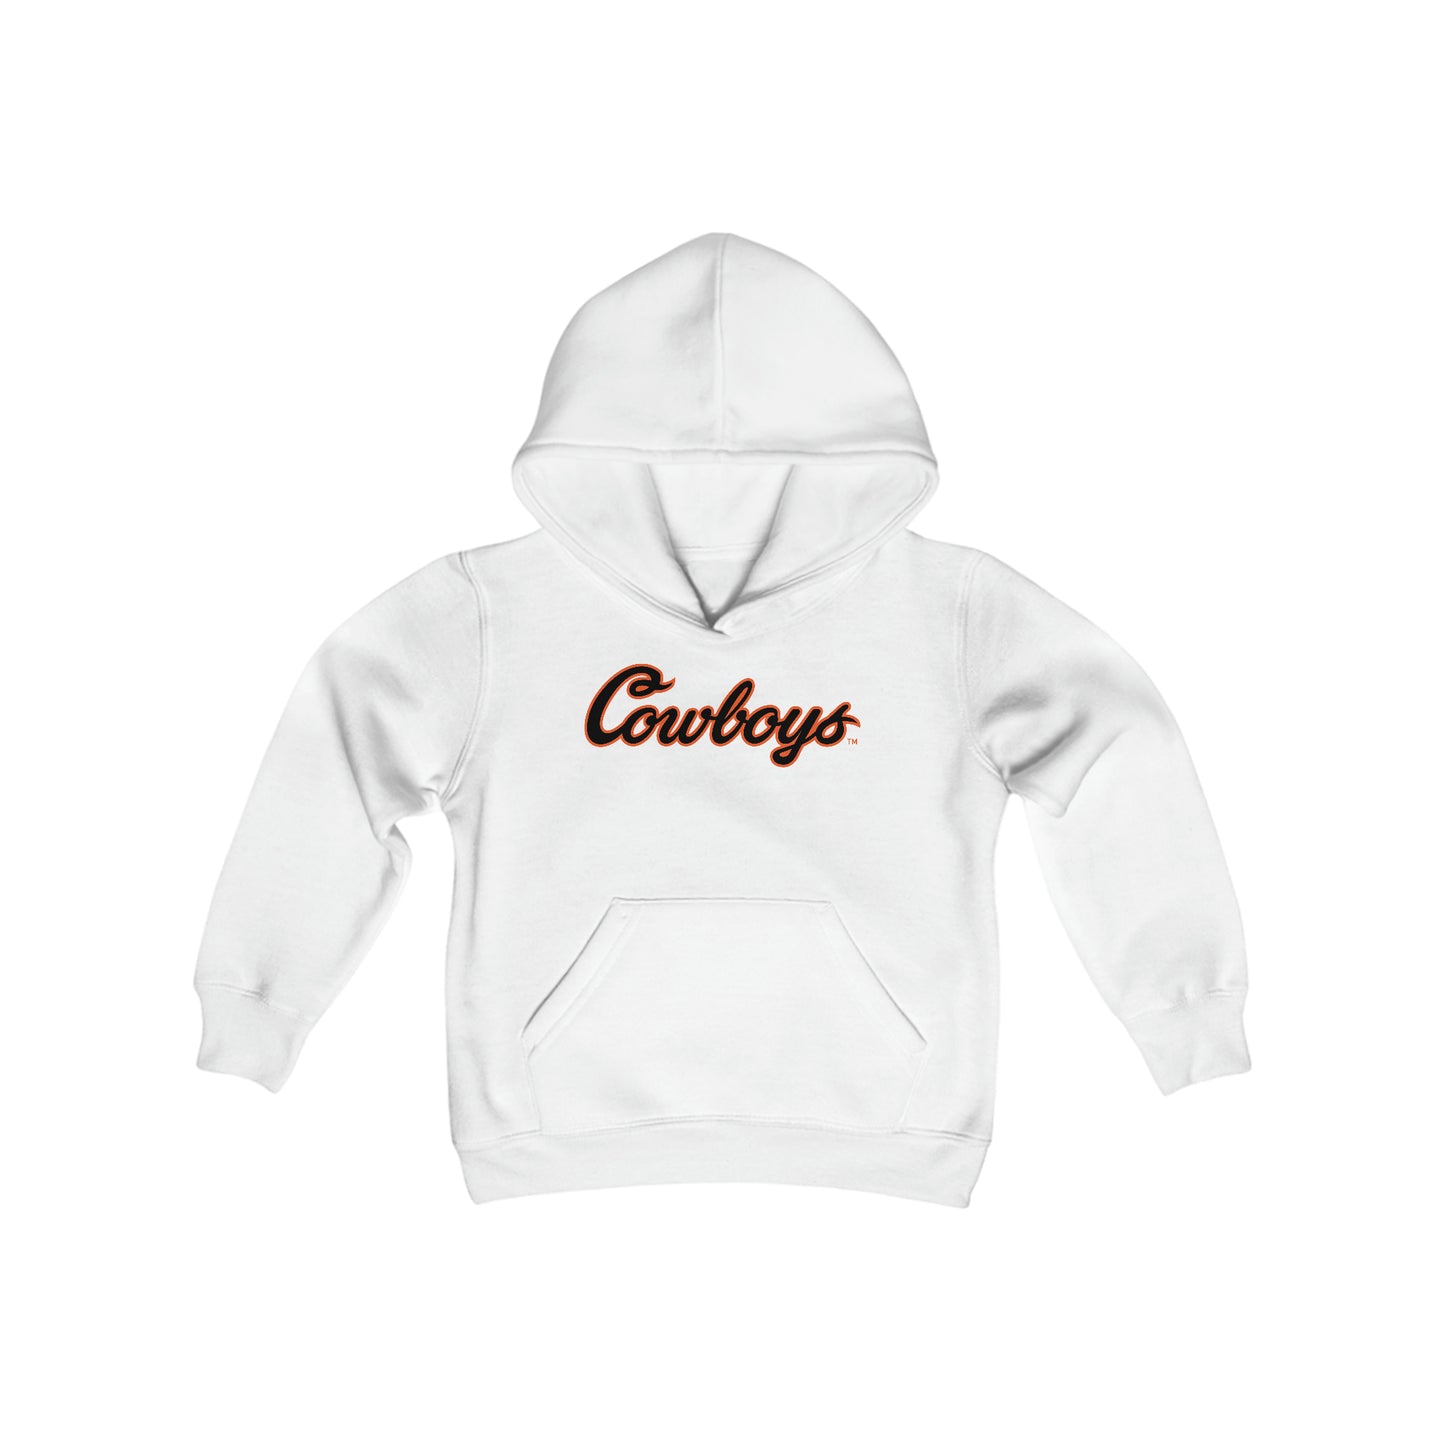 Carson Sager #15 Cursive Cowboys Youth Hoodie